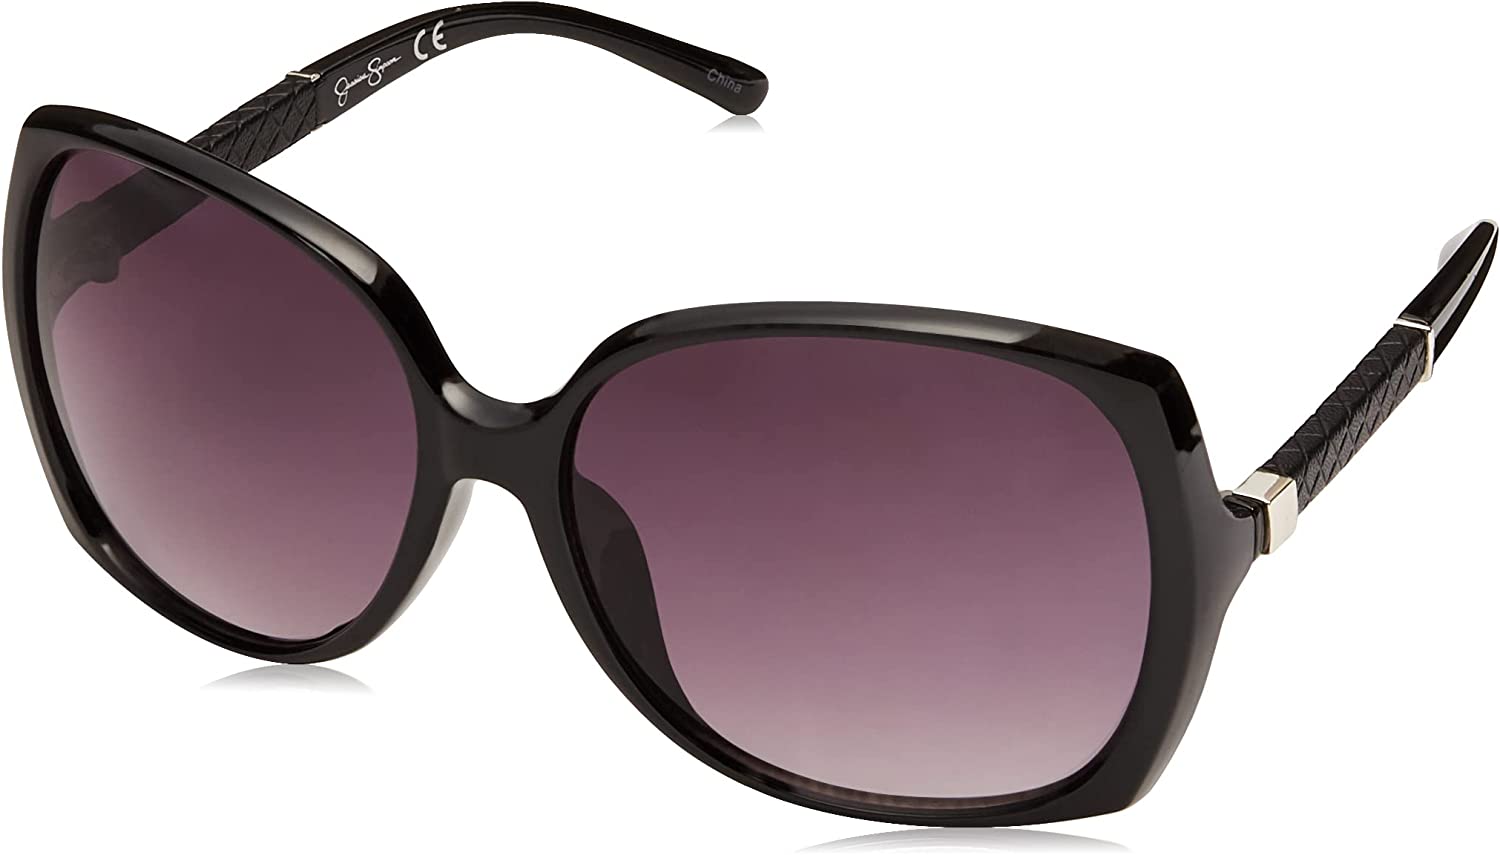 Jessica Simpson J5236 Oversized Women's Rectangular Sunglasses with 100% Uv Protection. Glam Gifts for Her, 60 Mm Butterfly